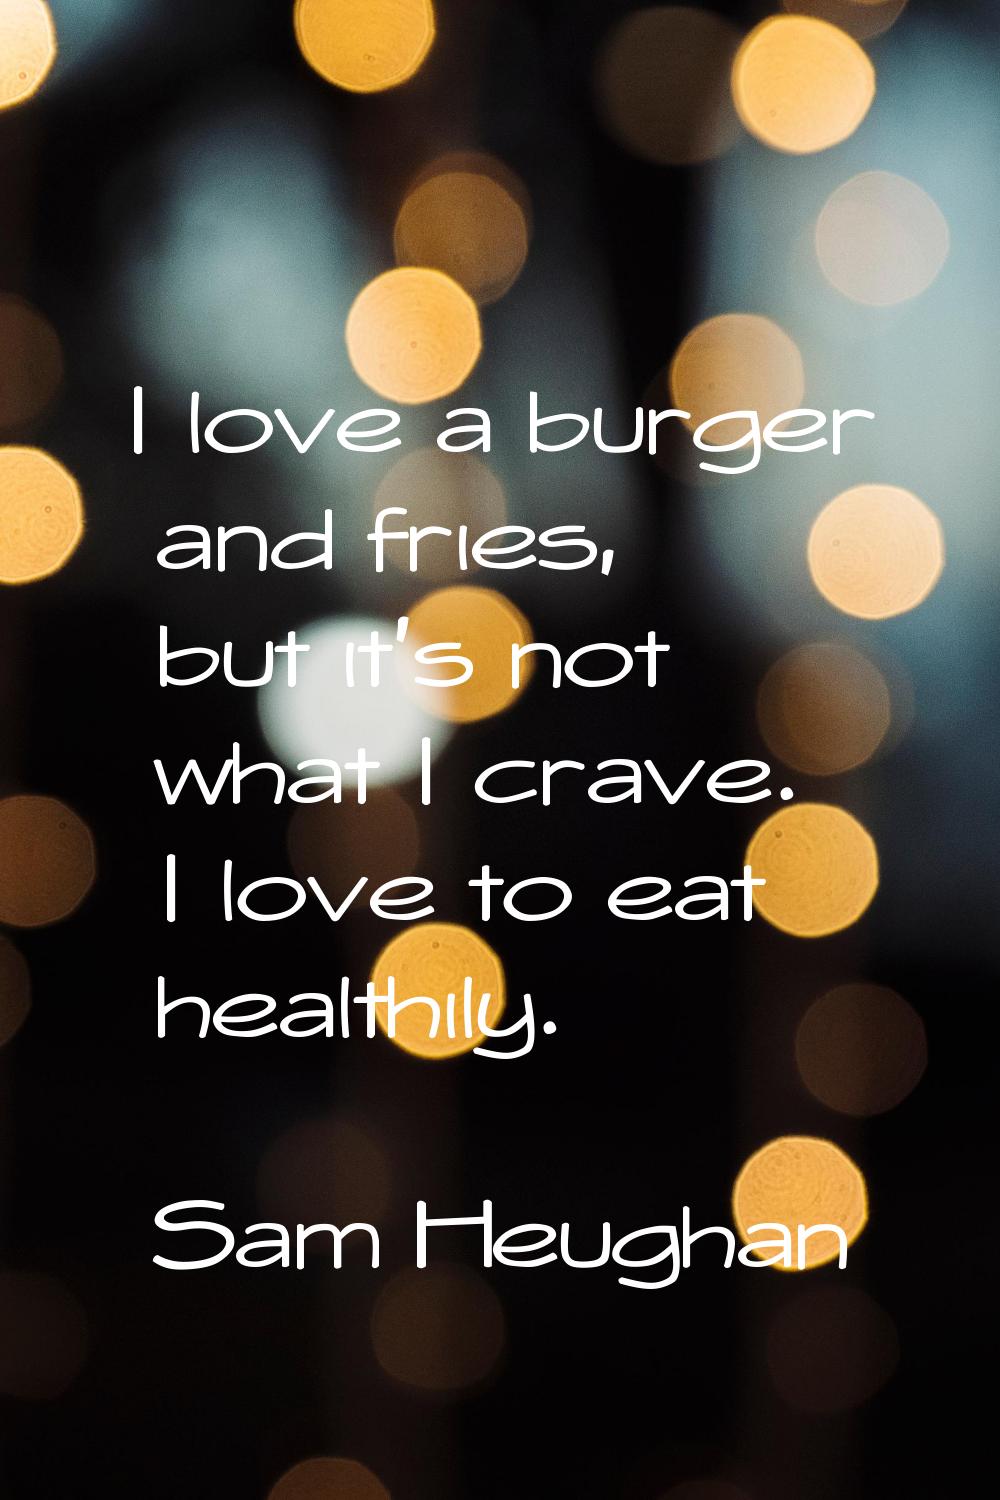 I love a burger and fries, but it's not what I crave. I love to eat healthily.